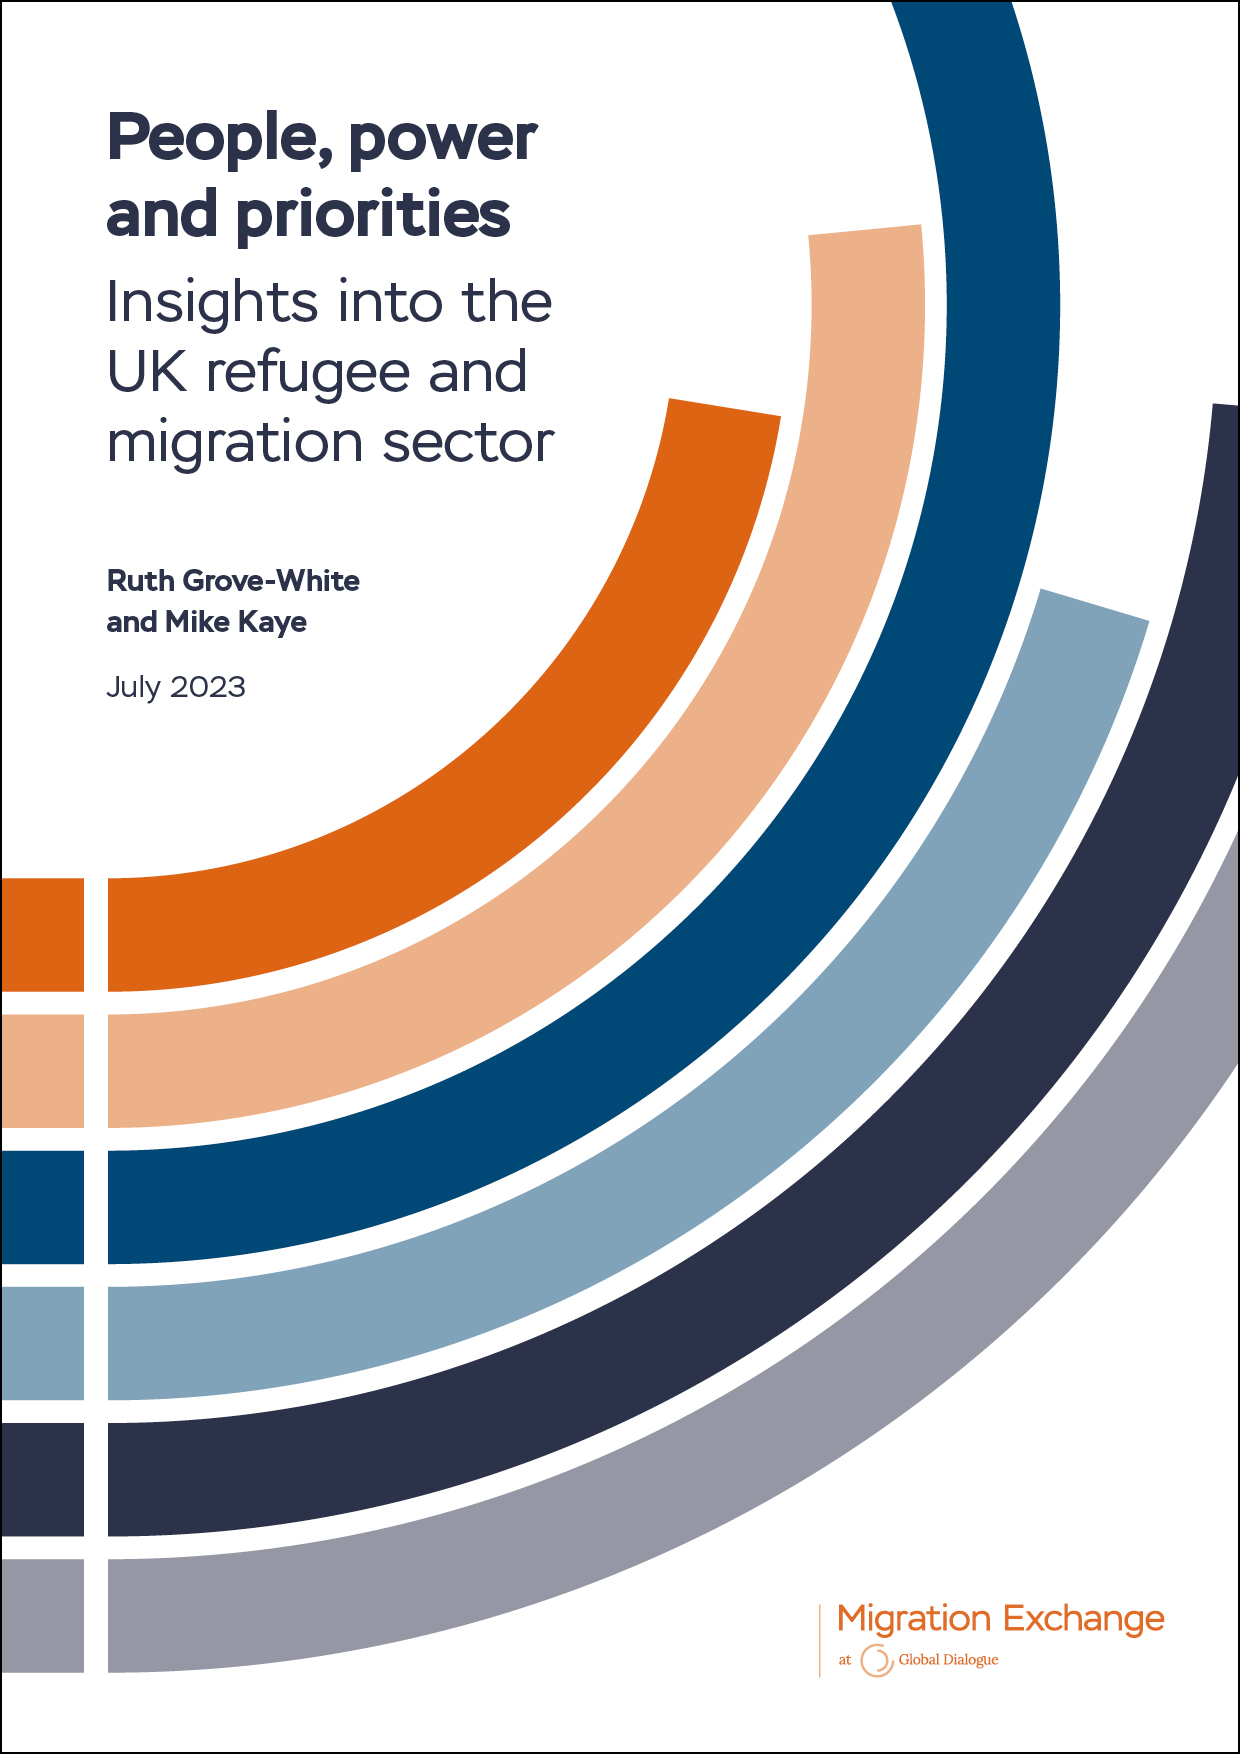 People, power and priorities - Insights into the UK refugee and migration sector. July 2023. Ruth Grove-White and Mike Kaye. (Report cover image)